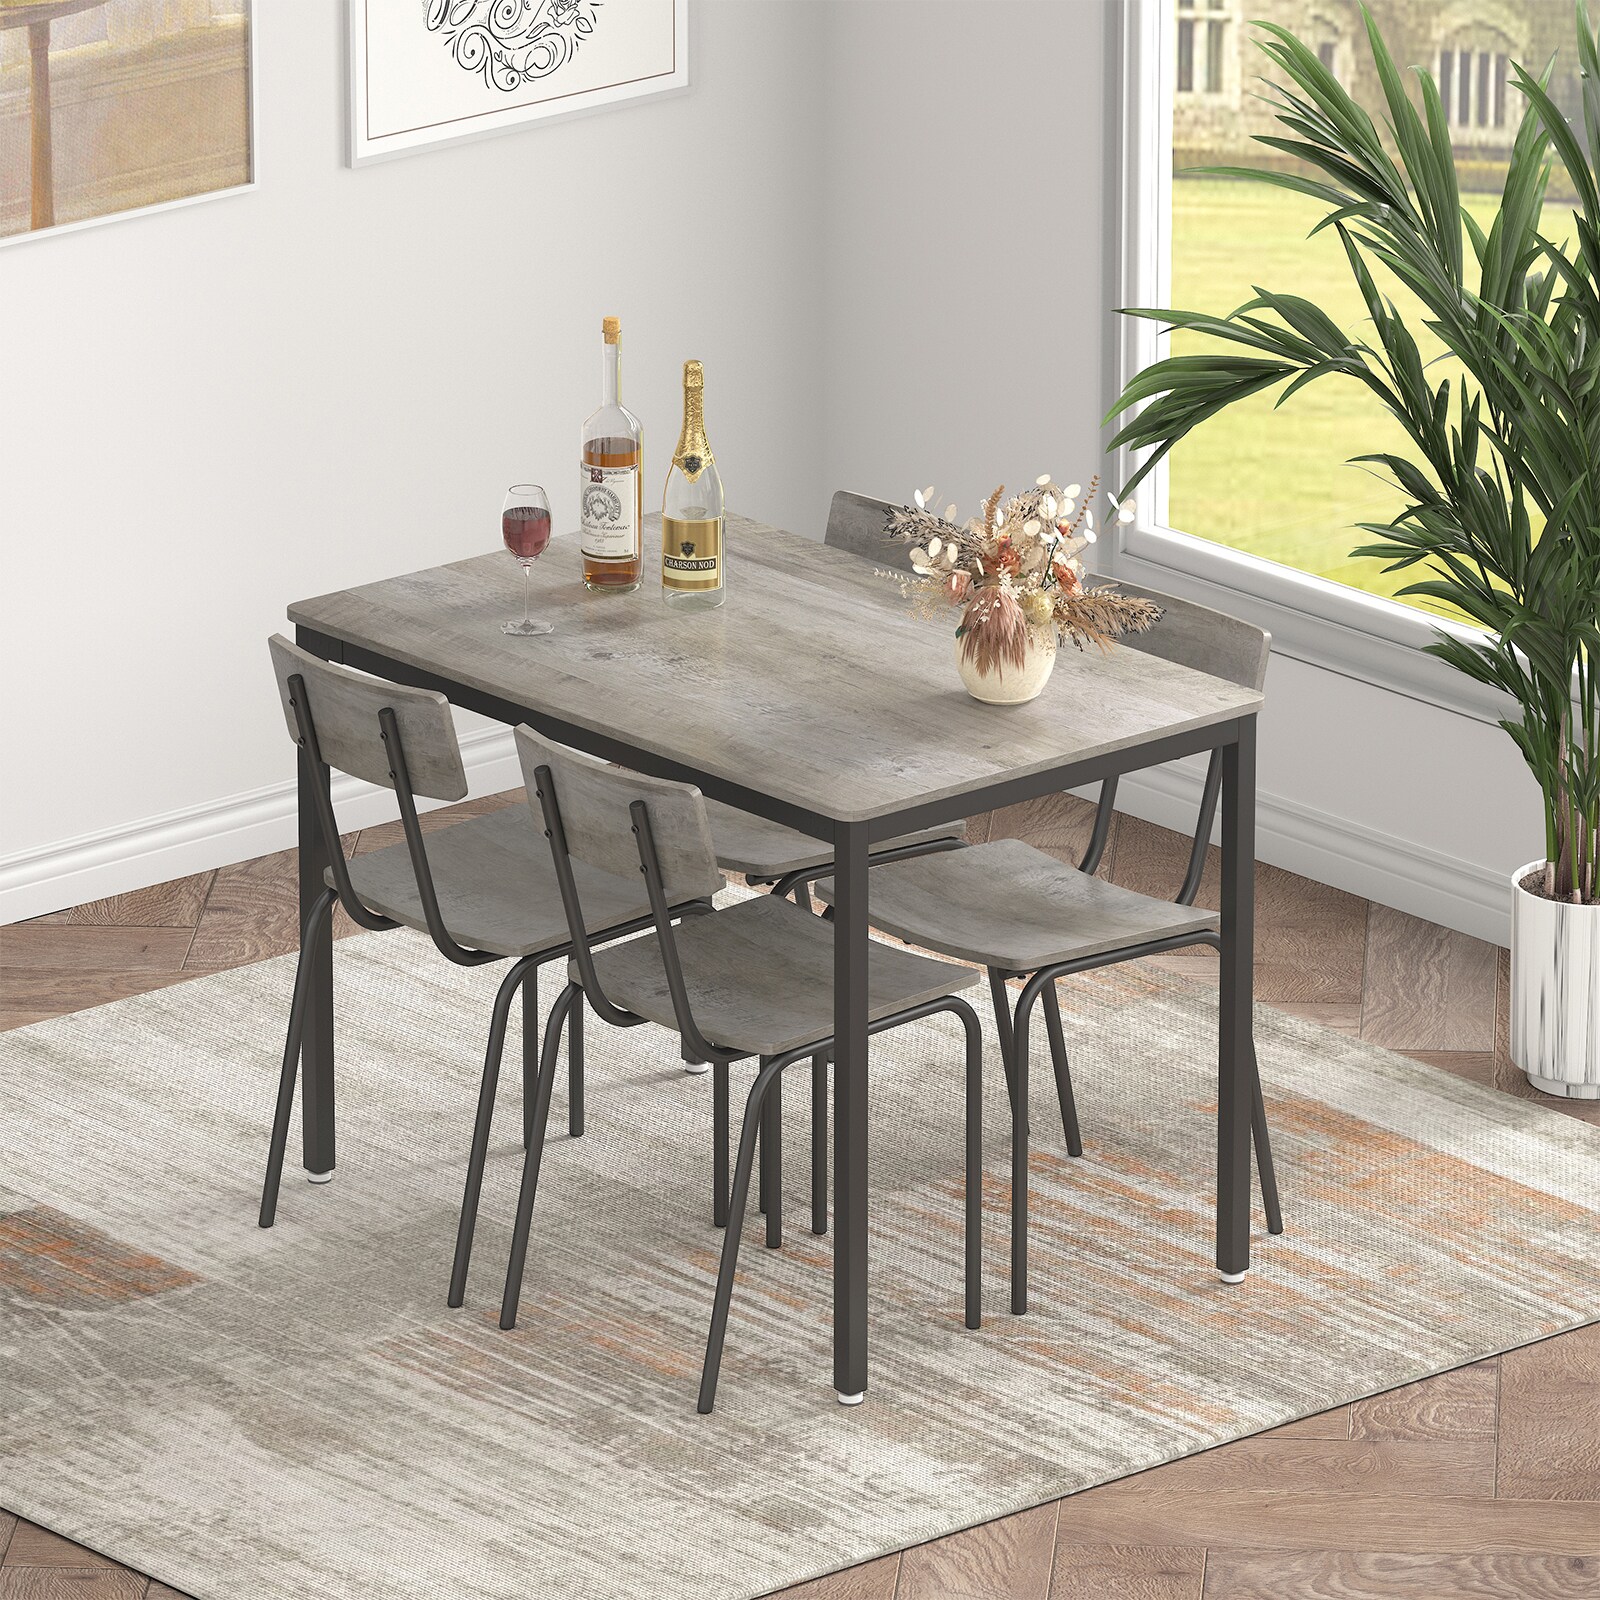 Qualler 6-Piece Wood Top Espresso Dining Table Set with 4 Dining Chairs, Brown